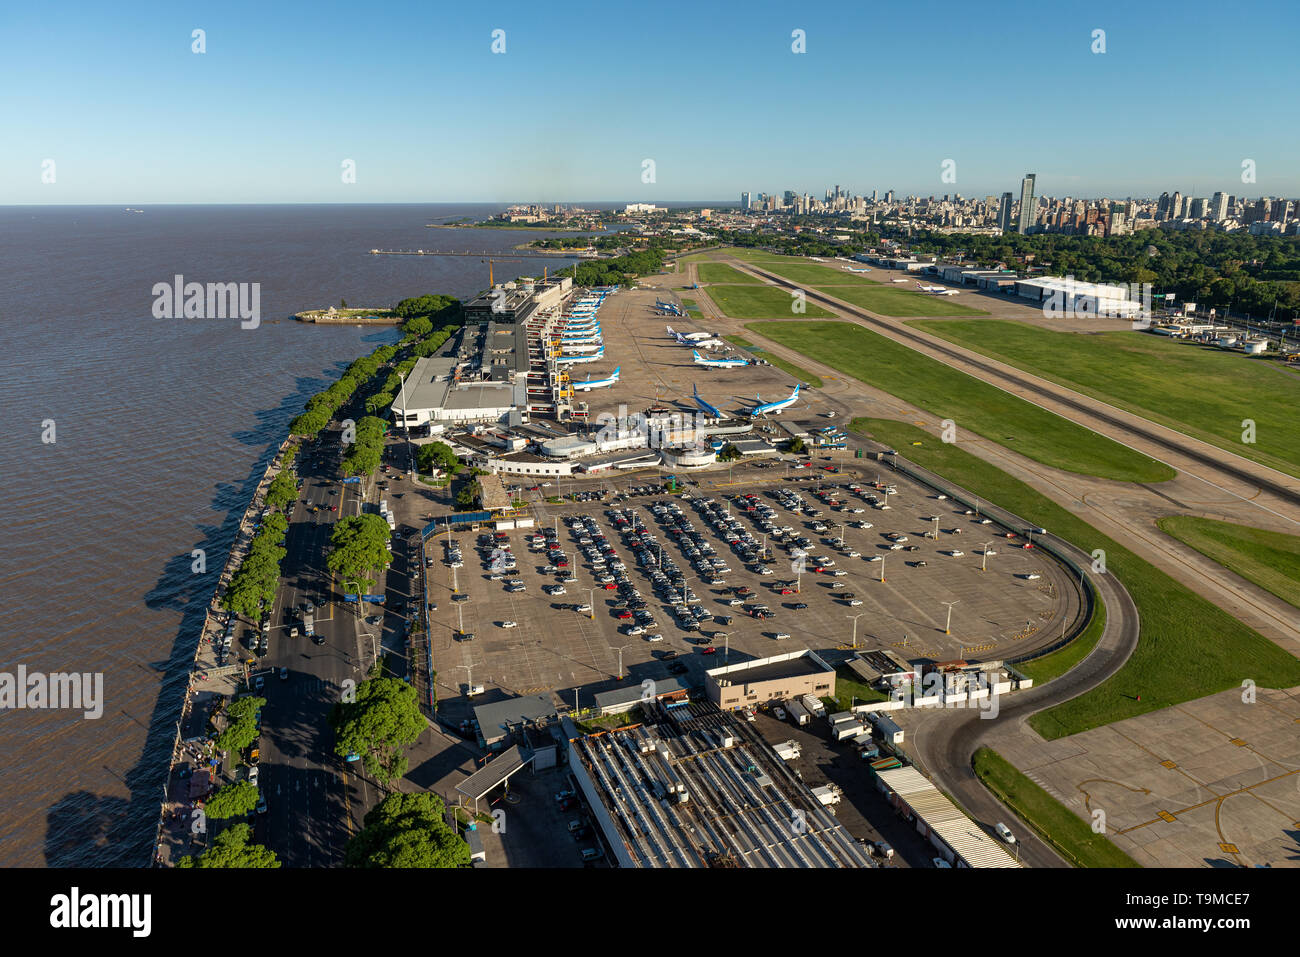 Aerial image showing the full Aeroparque Internacional Ing. Jorge Alejandro Newbery at the river Rio de la Plata with the city of Buenos Aires in the  Stock Photo